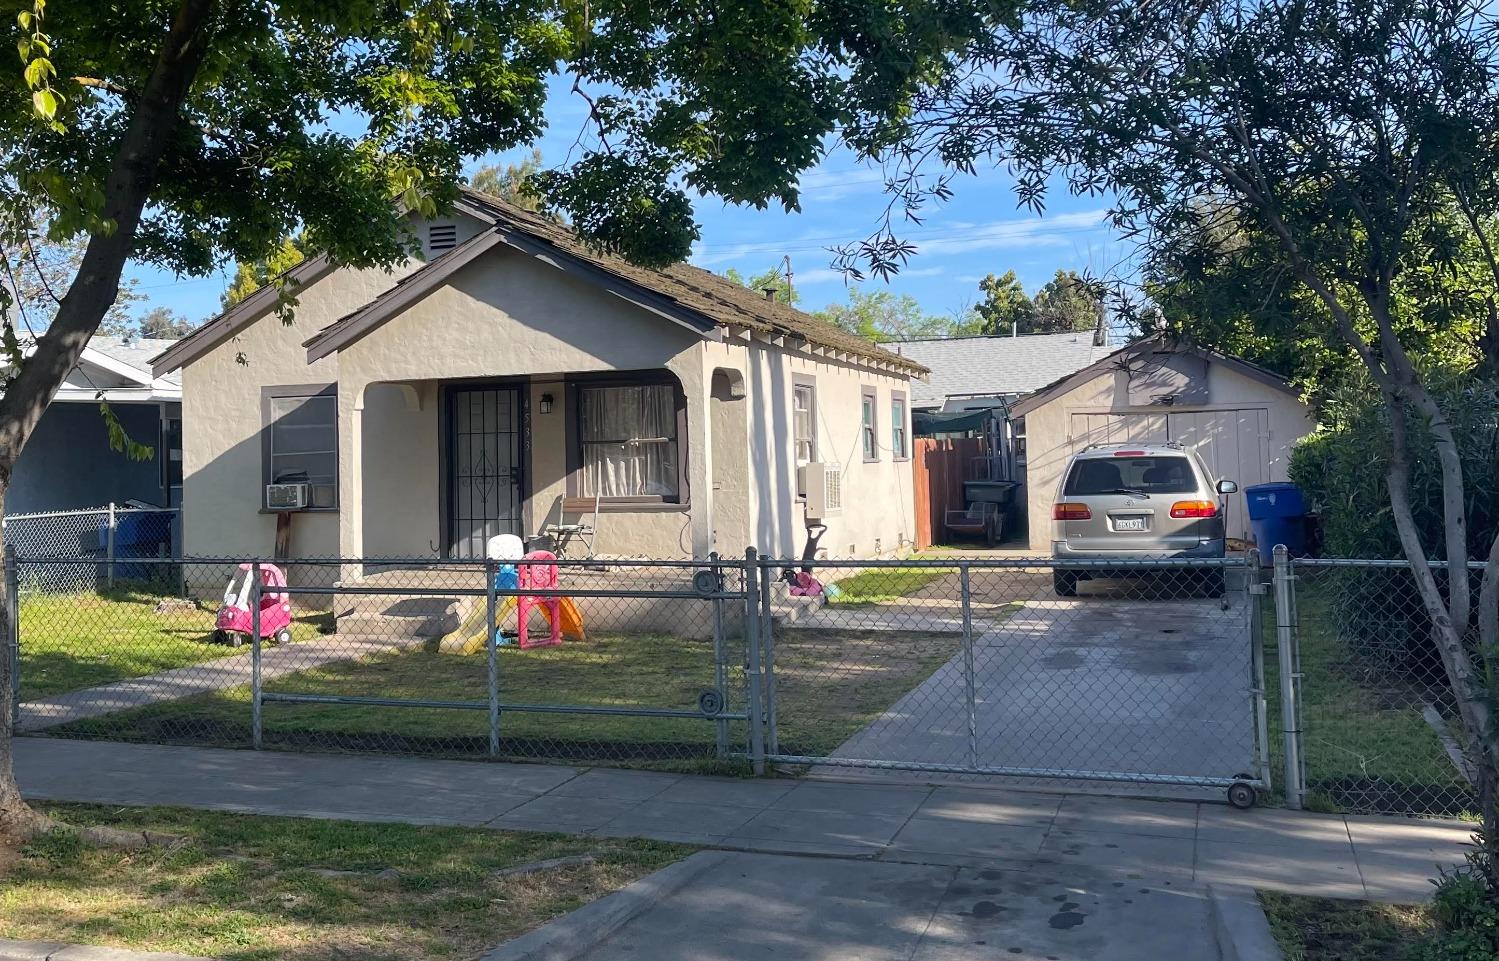 Investment opportunity! A fully rented duplex with long turn tenants on a month to month. Front unit is approx 1188 sqft 2bed 1bath and rear unit is approx 300 sqft 1bed 1bath.